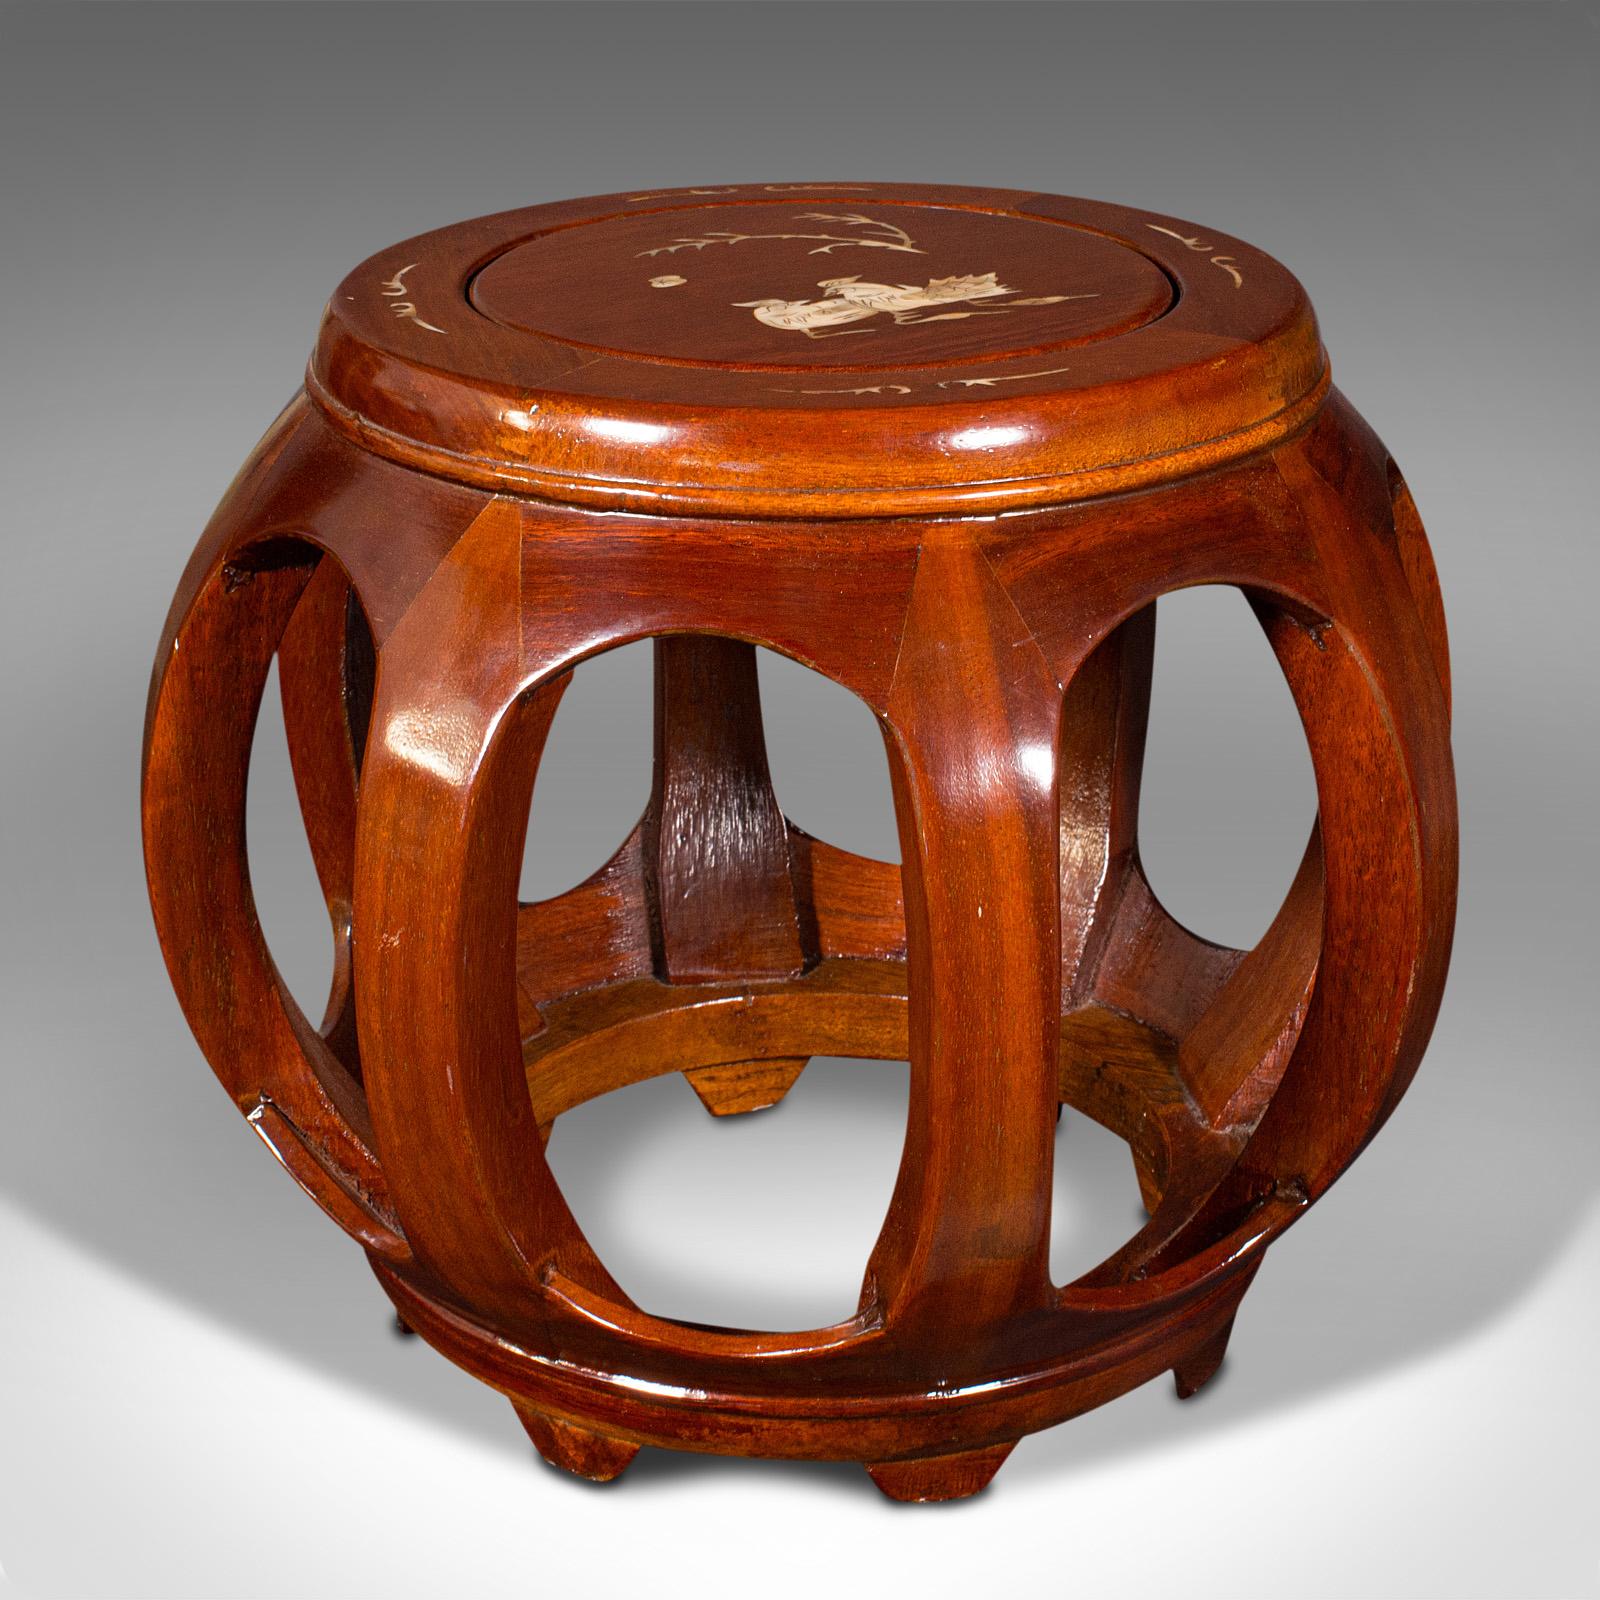 Pair Of Vintage Barrel Stools, Chinese, Inlaid, Decorative Display Stand, C.1970 For Sale 1